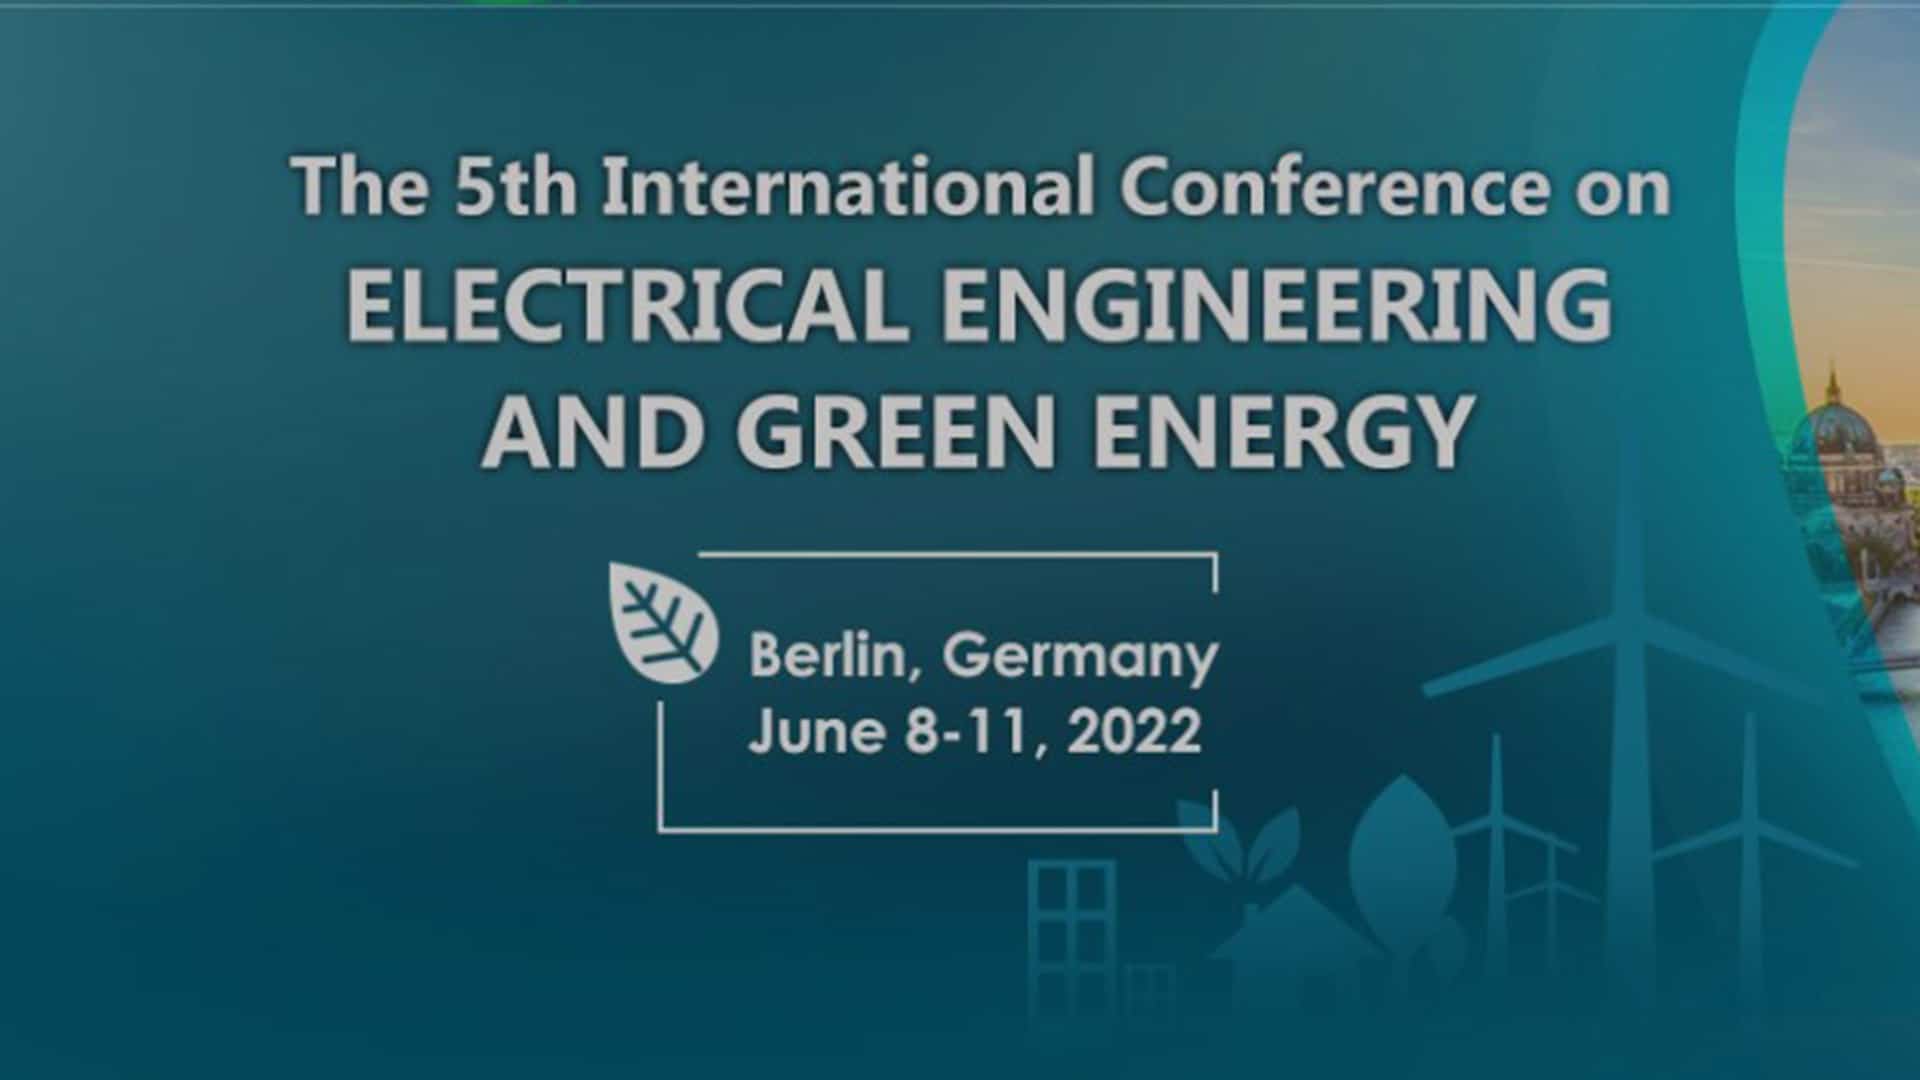 2022 The 5th International Conference on Electrical Engineering and